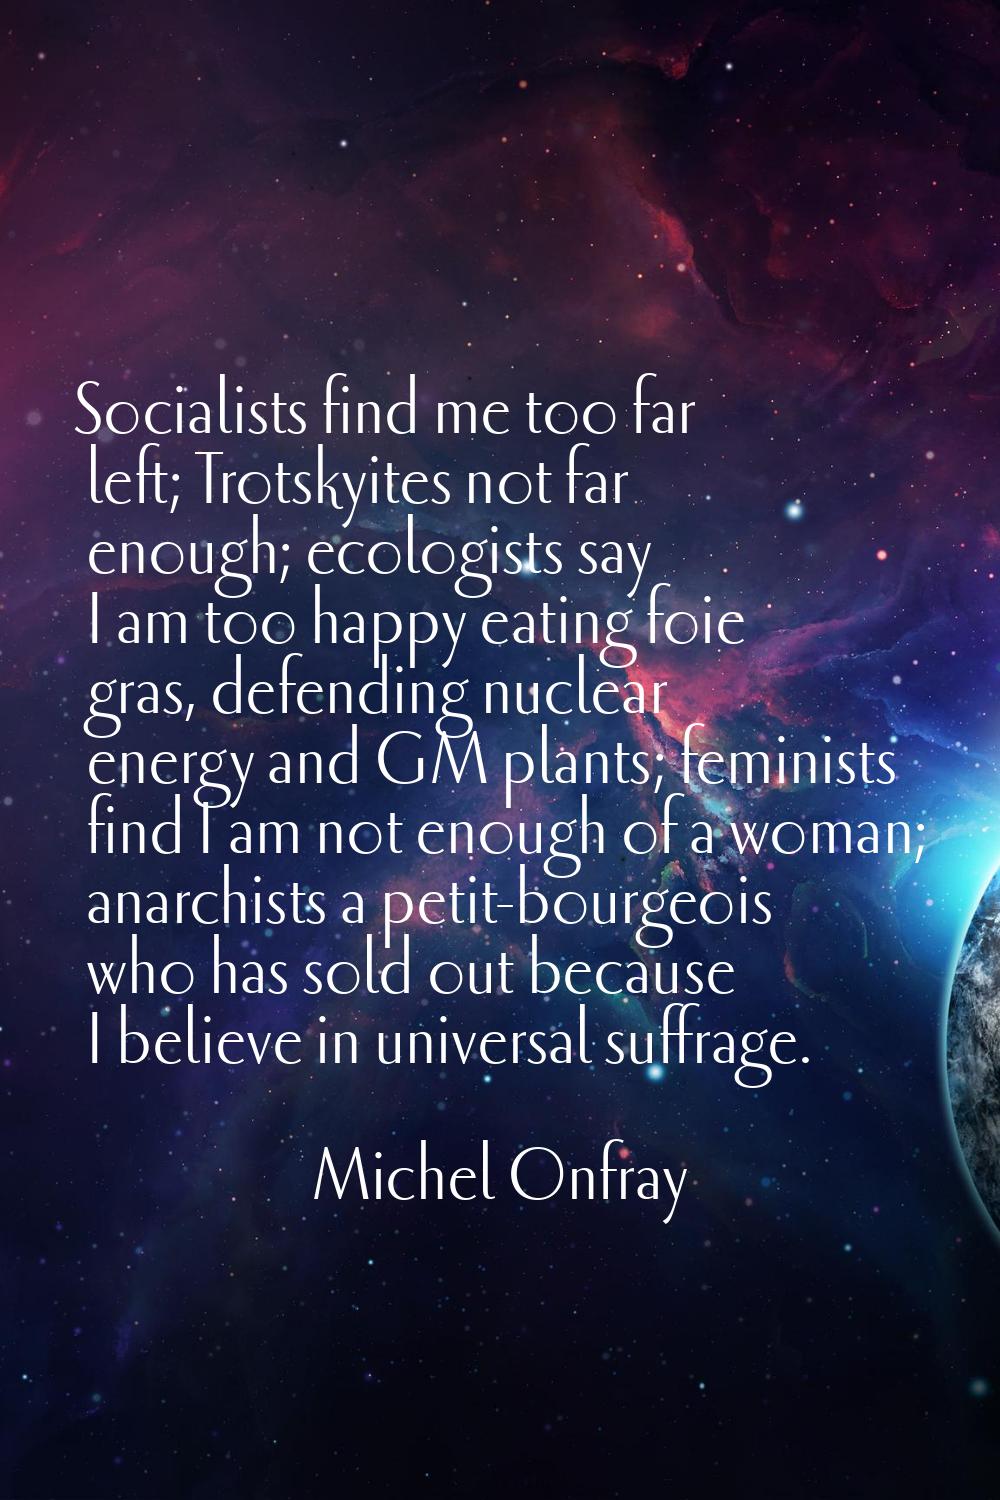 Socialists find me too far left; Trotskyites not far enough; ecologists say I am too happy eating f